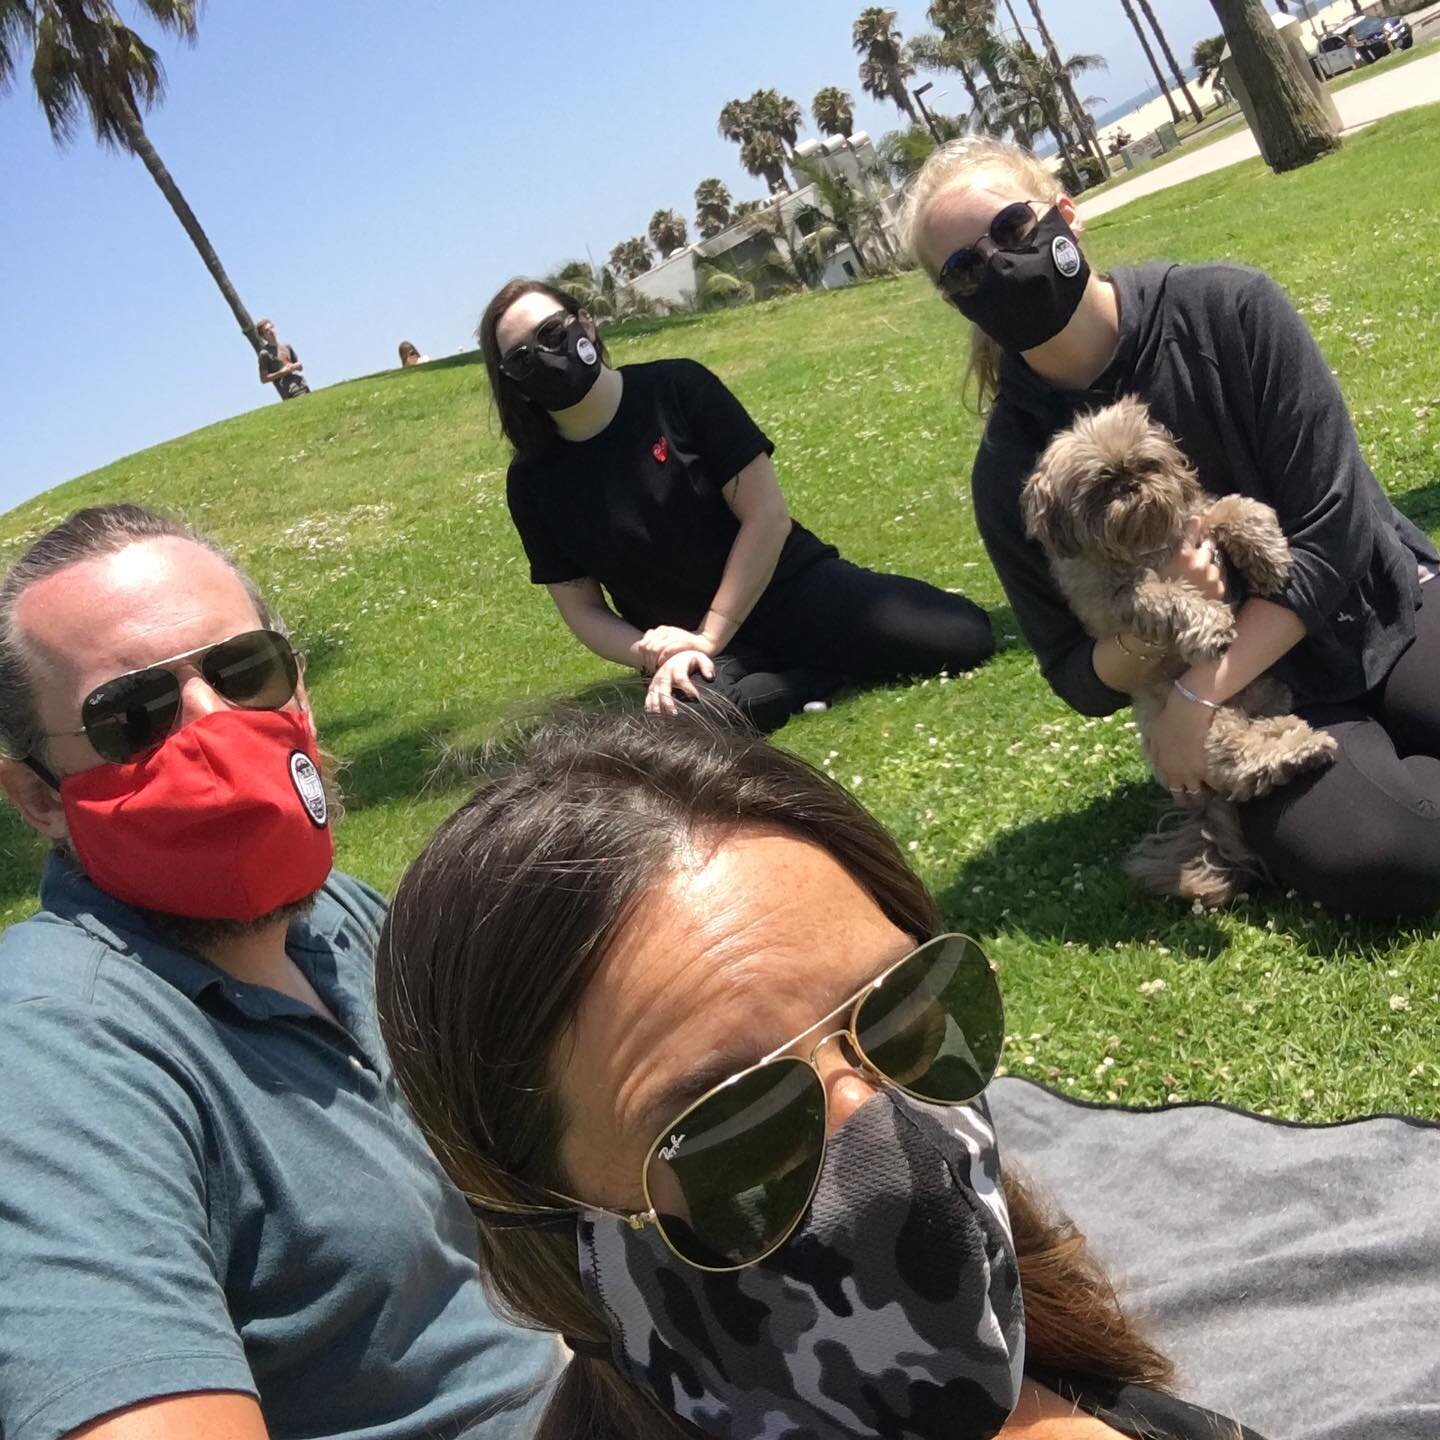 First team work lunch since production shutdown in March. Grateful for this crew family and wide open spaces for a socially distanced lunch.
.
Masks: @7thfloorclothing 😷Lunch: @ashlandhillsm 🥗Talent: @charlietheewok ⭐️
.
.
#indiefilmmaker #femalefi